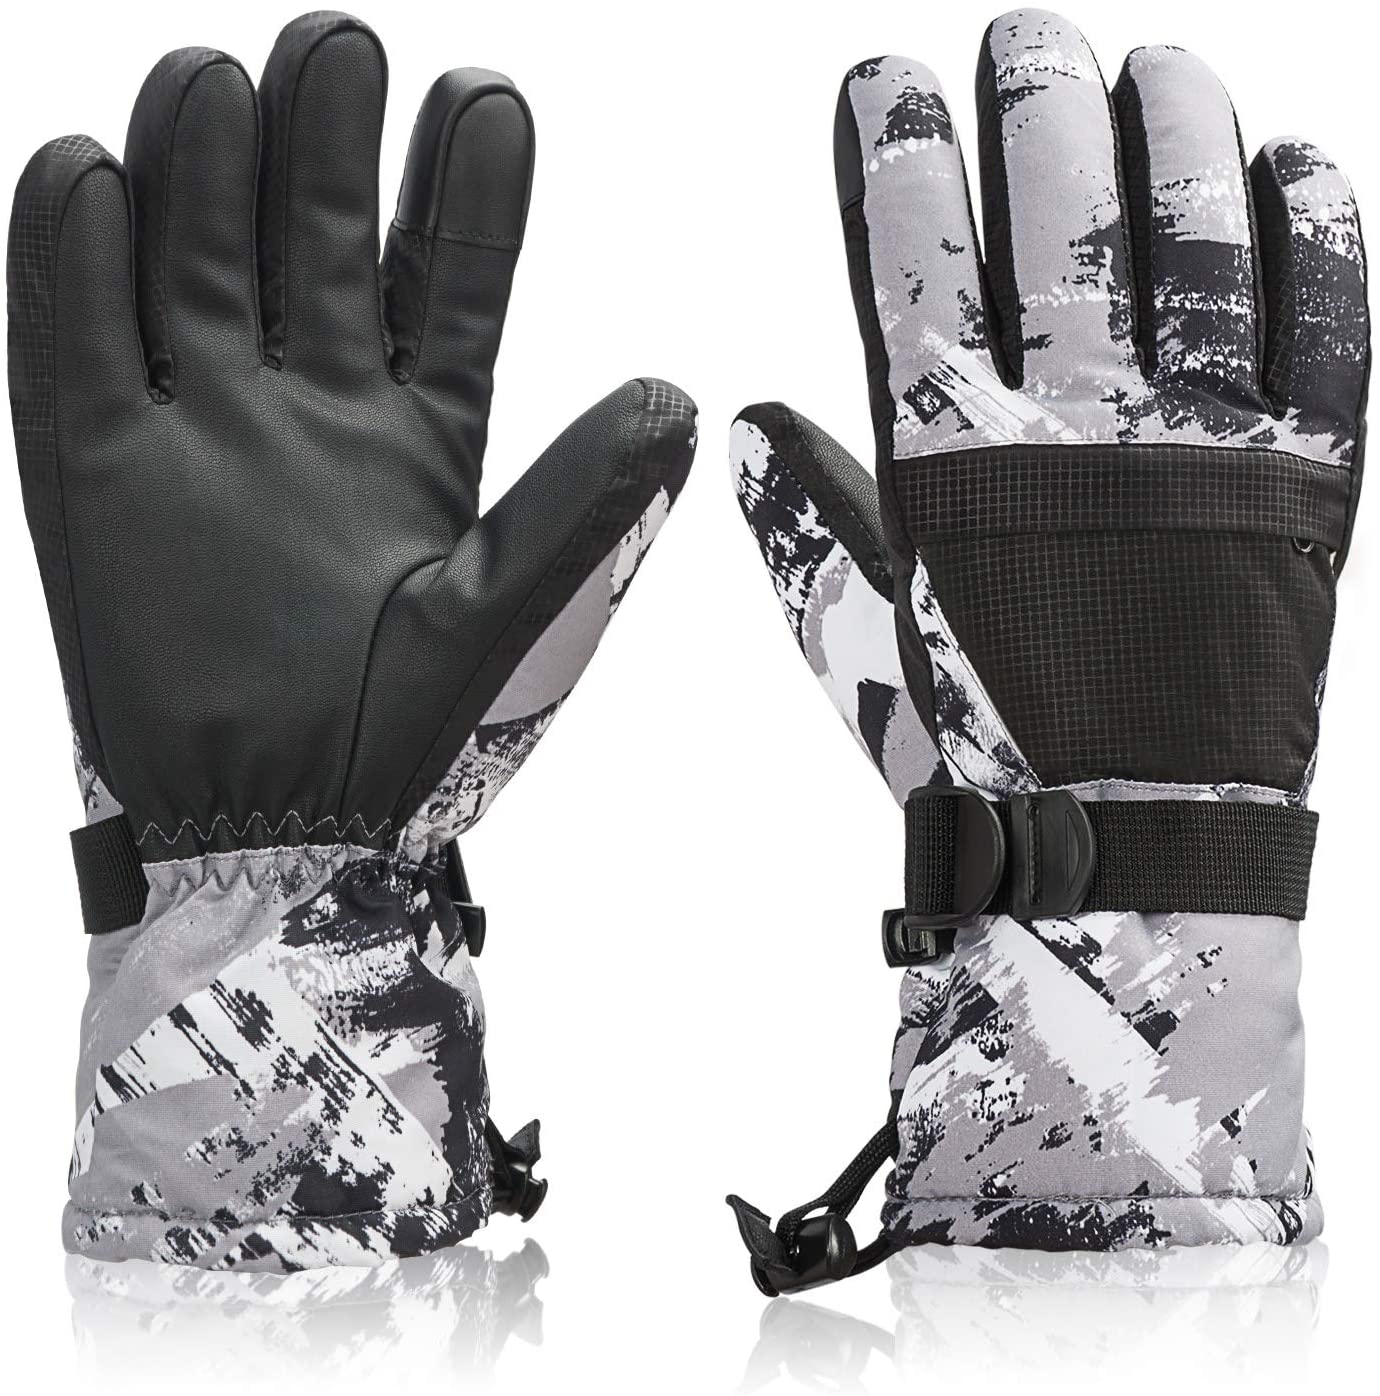 Exclusivo Mezcla Ski Snowboard Gloves, Waterproof Winter Warm Gloves, Cold Weather Touchscreen Snow Gloves for Mens, Womens, Kids Skiing,Snowboarding